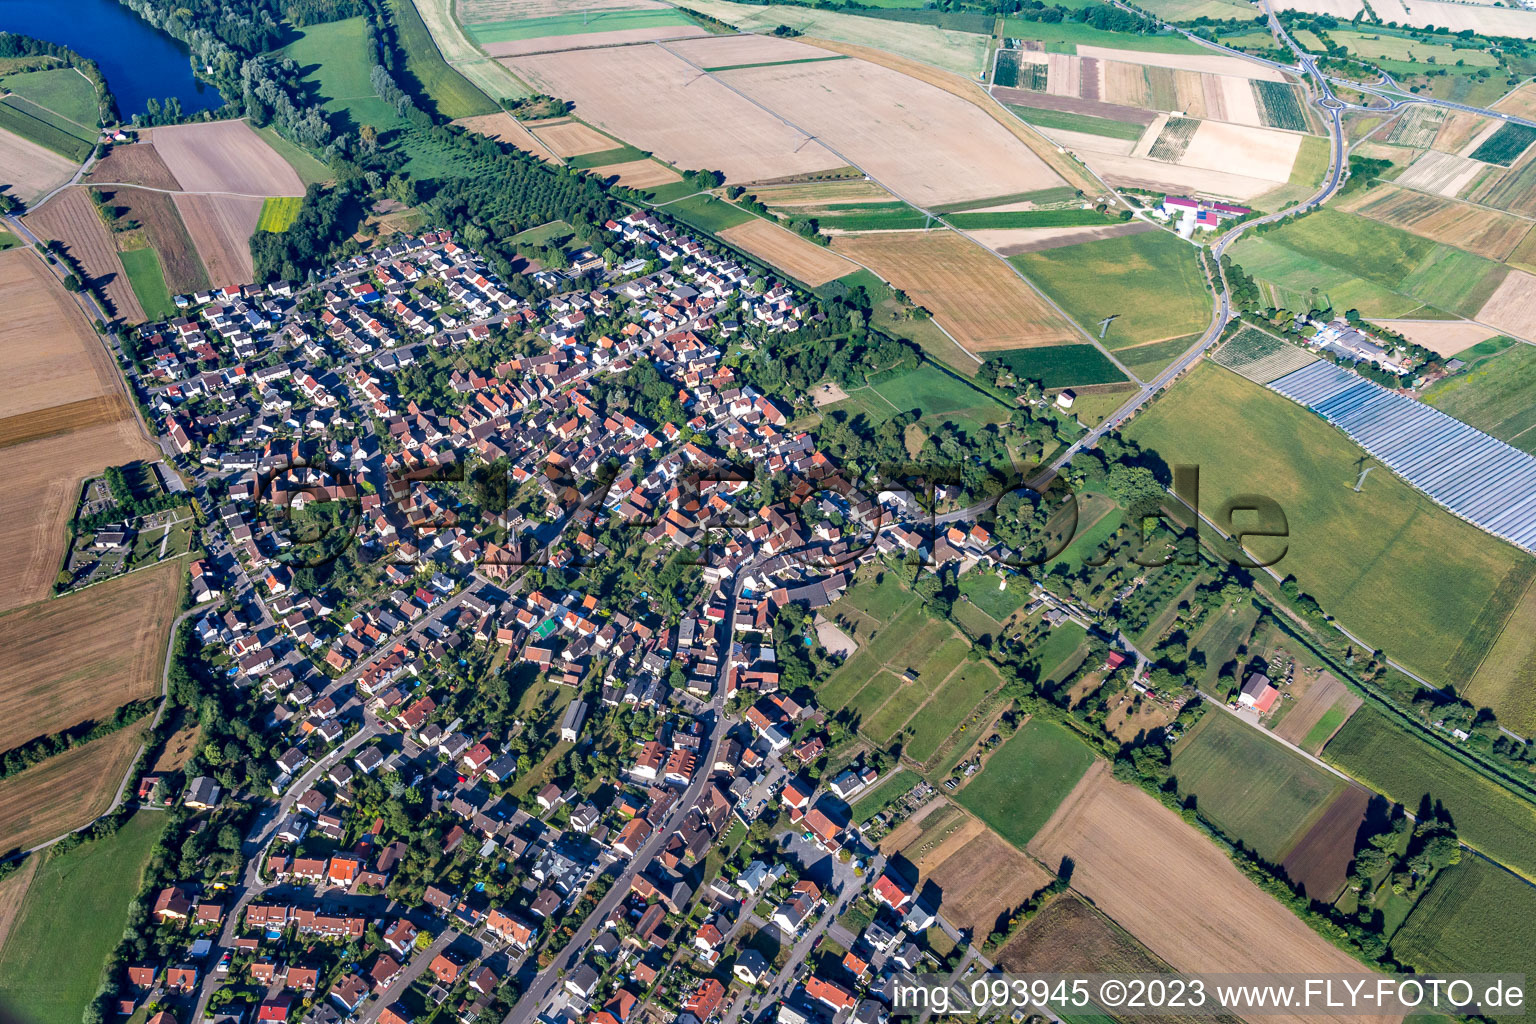 District Staffort in Stutensee in the state Baden-Wuerttemberg, Germany seen from above